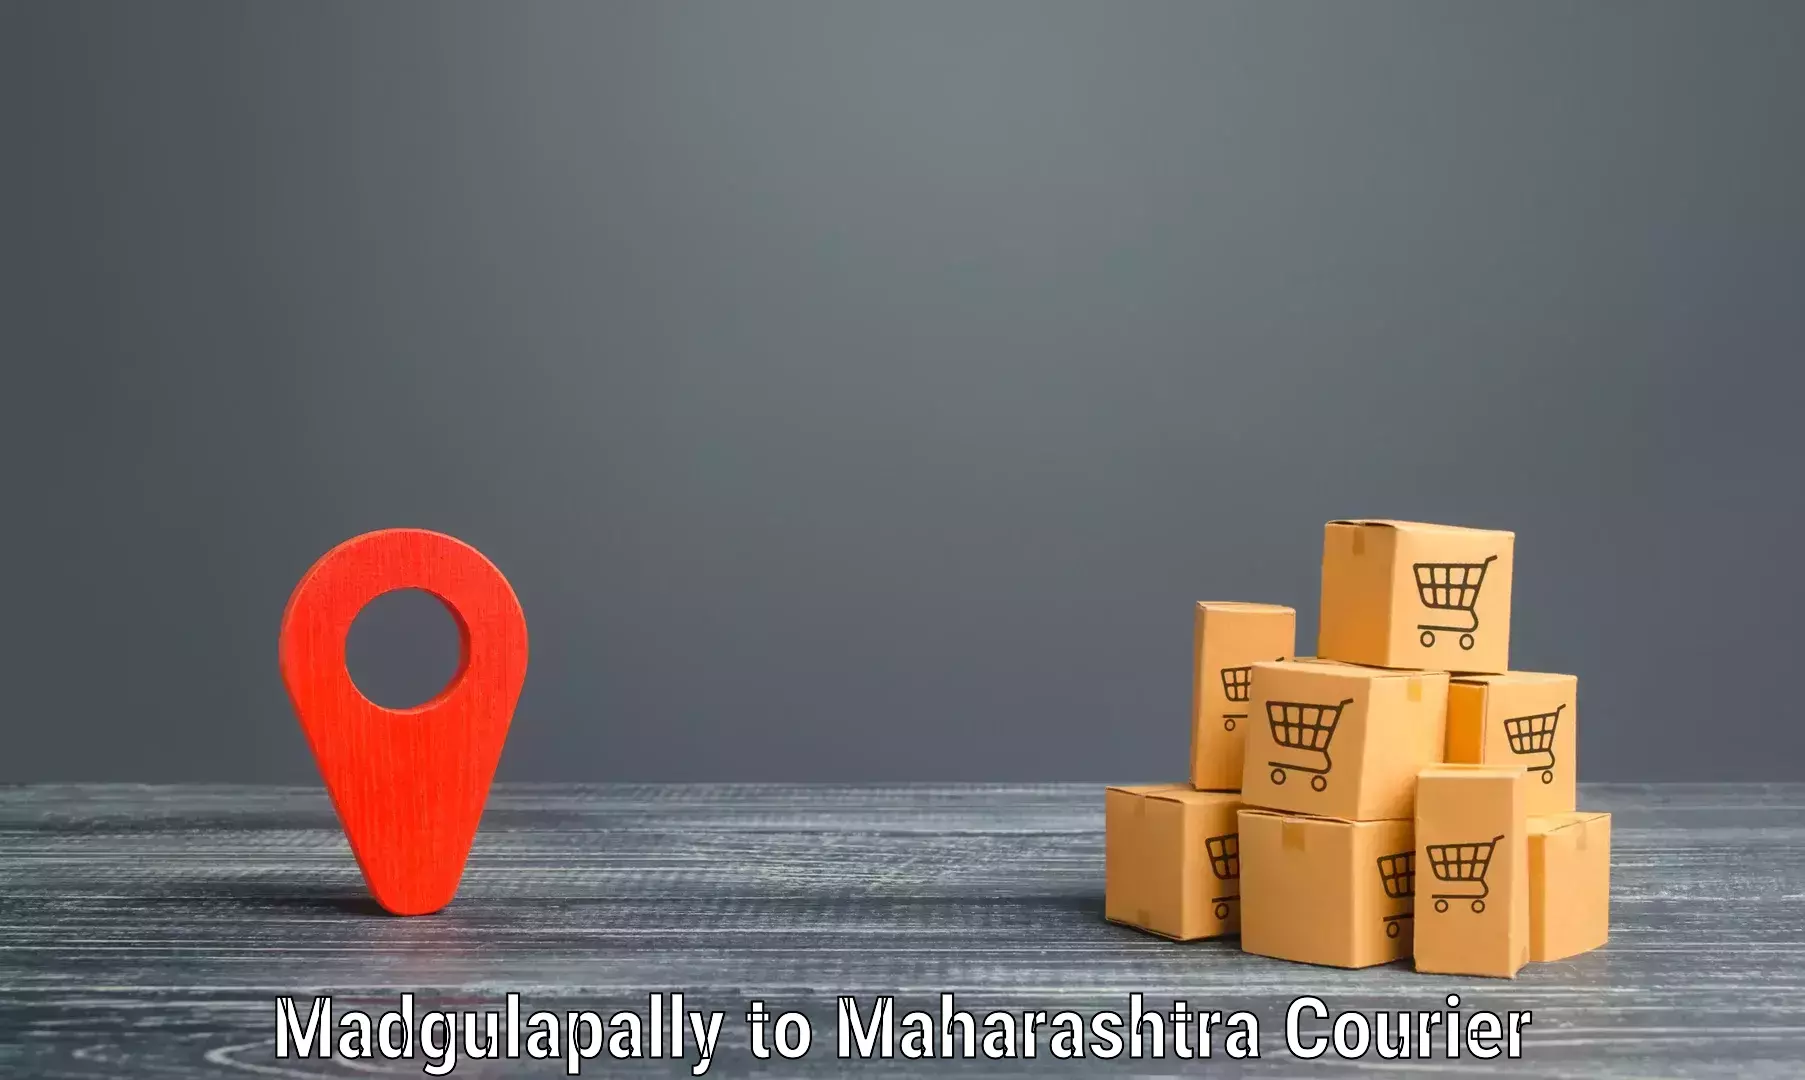 On-demand delivery Madgulapally to Kalyan Dombivli